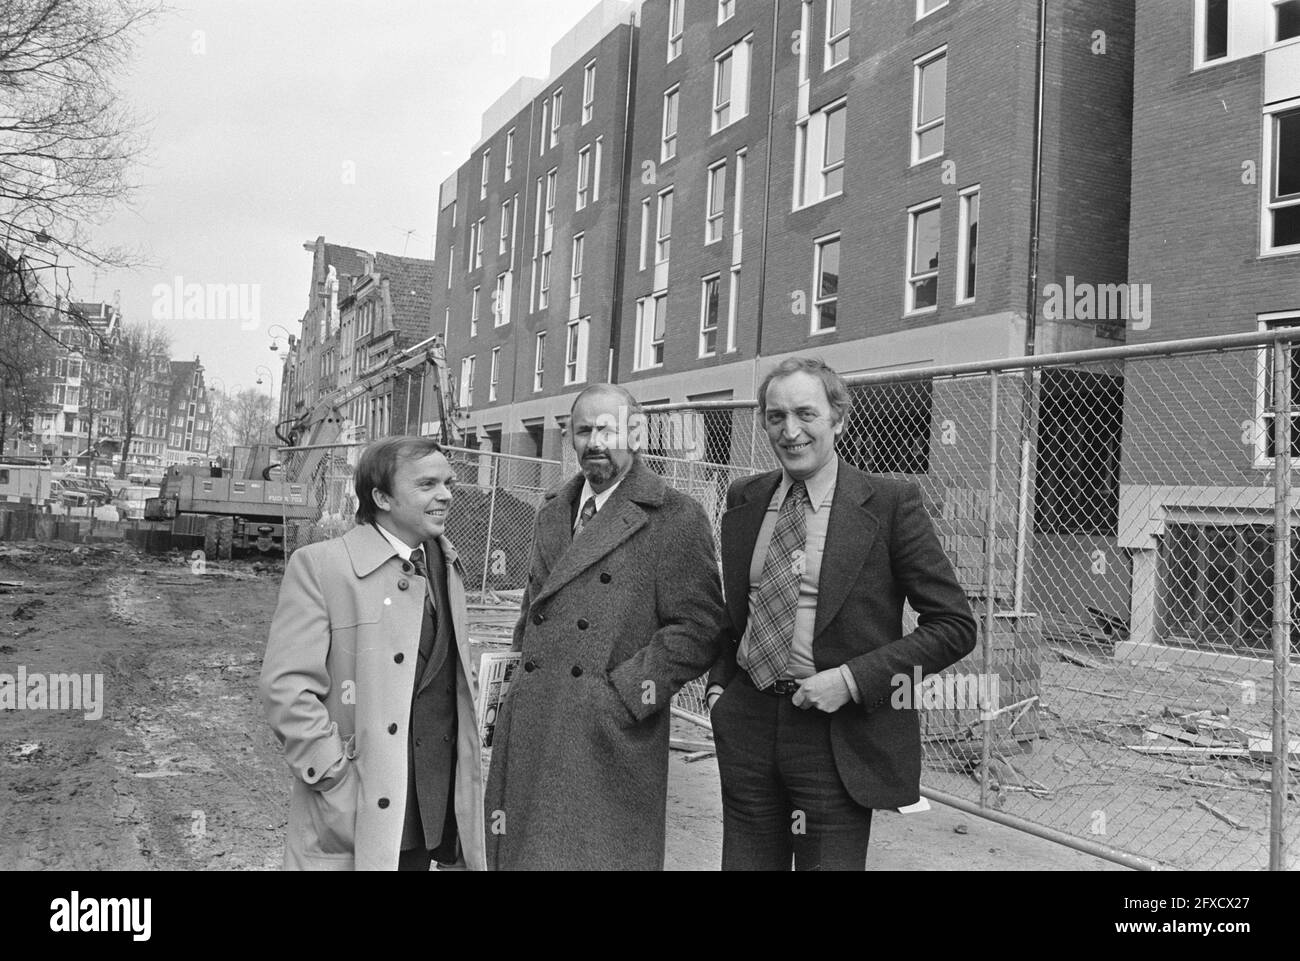 Press conference regarding construction of Sonesta Hotel in Amsterdam and the Round Lutheran Church involved; Keller, Sonnabend and De Klerk, November 12, 1974, architects, hotels, press conferences, The Netherlands, 20th century press agency photo, news to remember, documentary, historic photography 1945-1990, visual stories, human history of the Twentieth Century, capturing moments in time Stock Photo